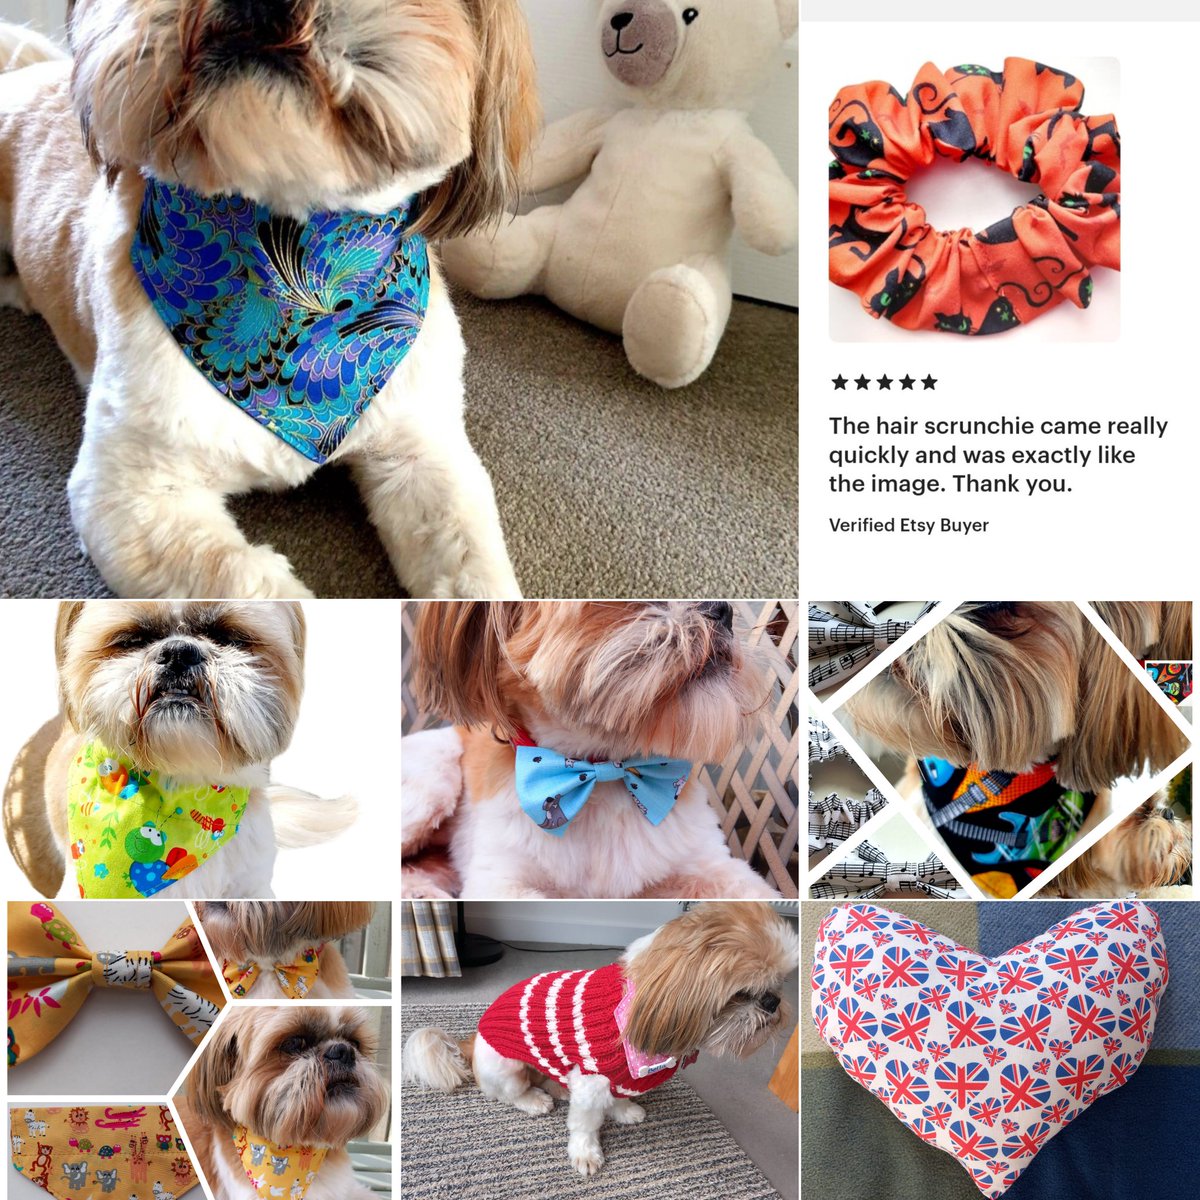 Check out my shop at blackpoolbella.com for over 300 items. All handmade. Same day dispatch, worldwide. 900 five-star reviews. Hair bows, scrunchies and Headbands too! Please repost. Thank you!